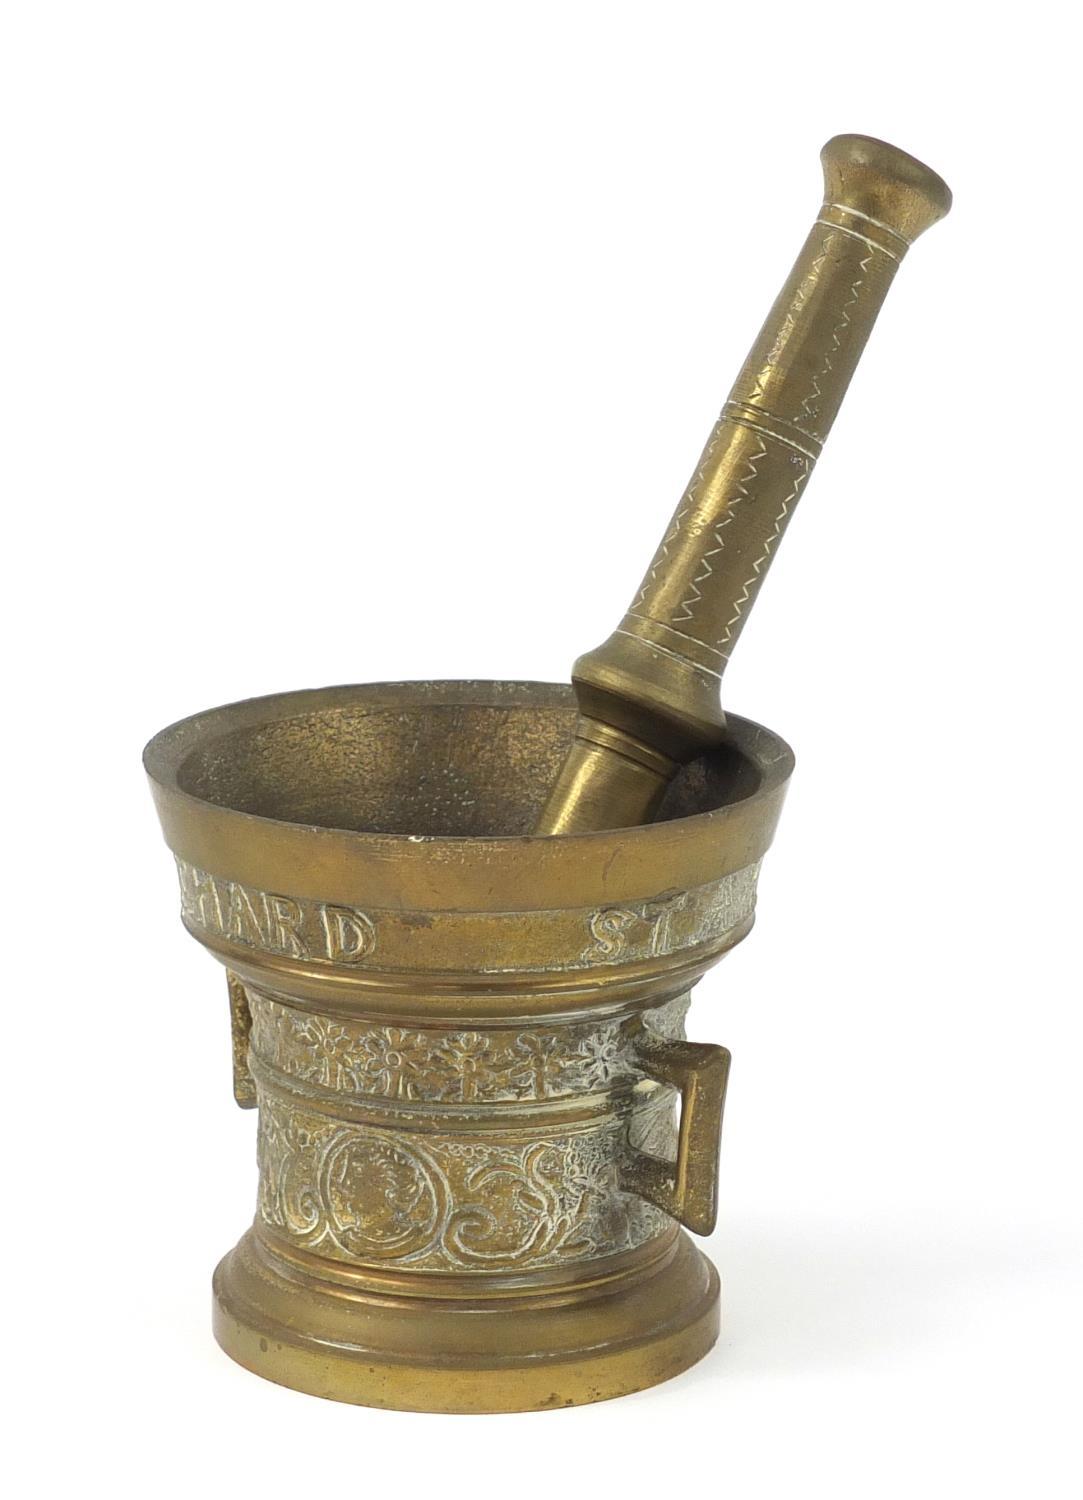 17th century style brass pestle and mortar, decorated with figures and flowers, the mortar 12cm high